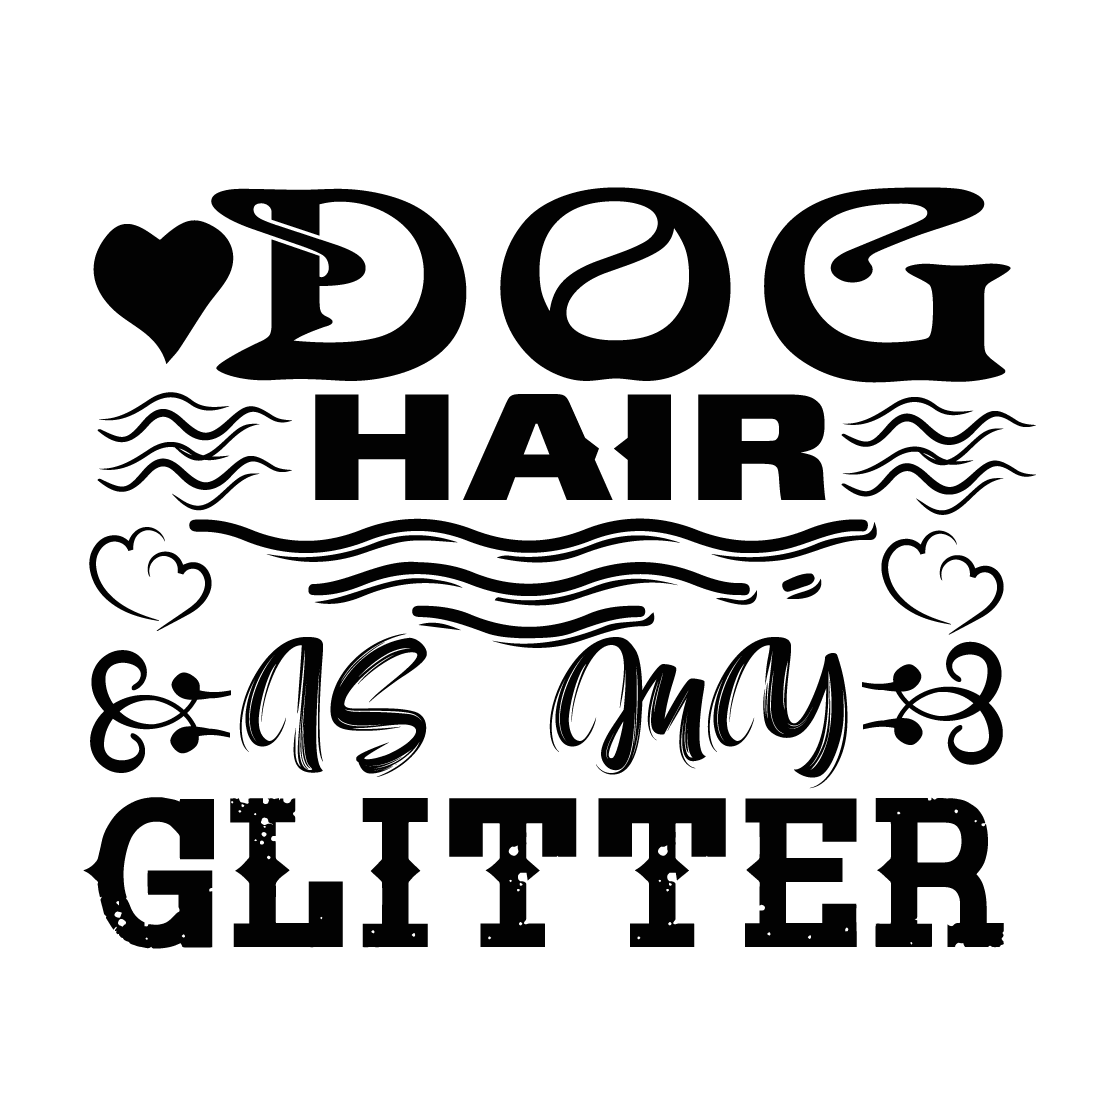 Dog hair is my glitter preview image.